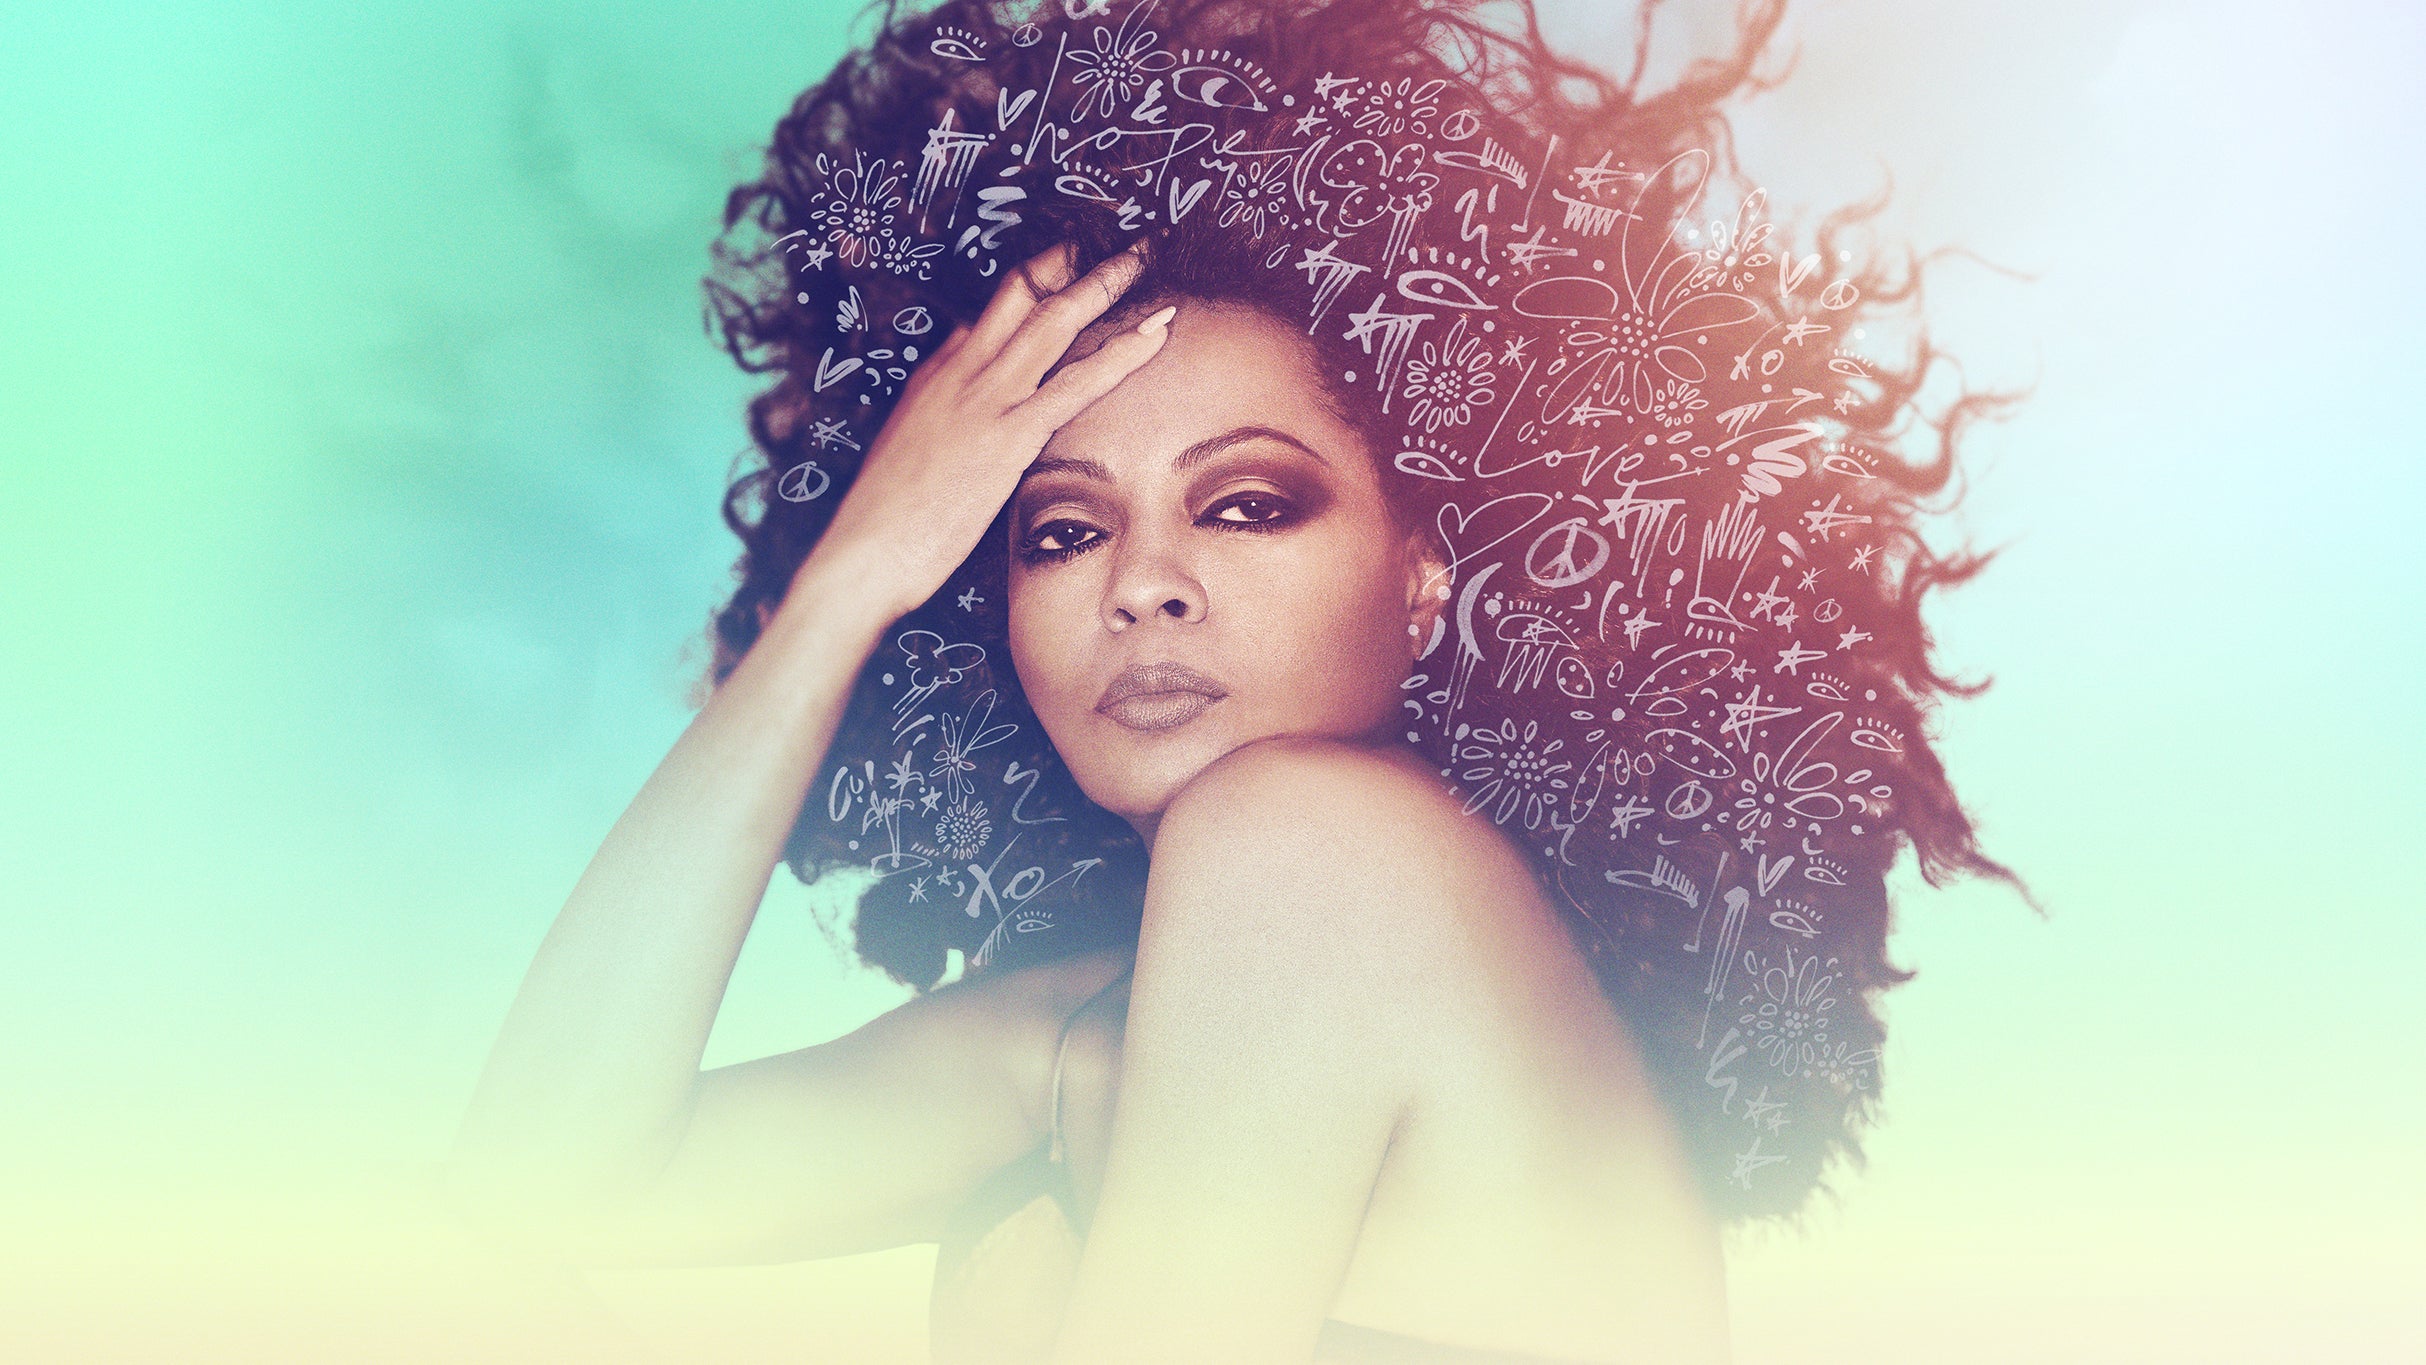 Diana Ross pre-sale password for advance tickets in Newark